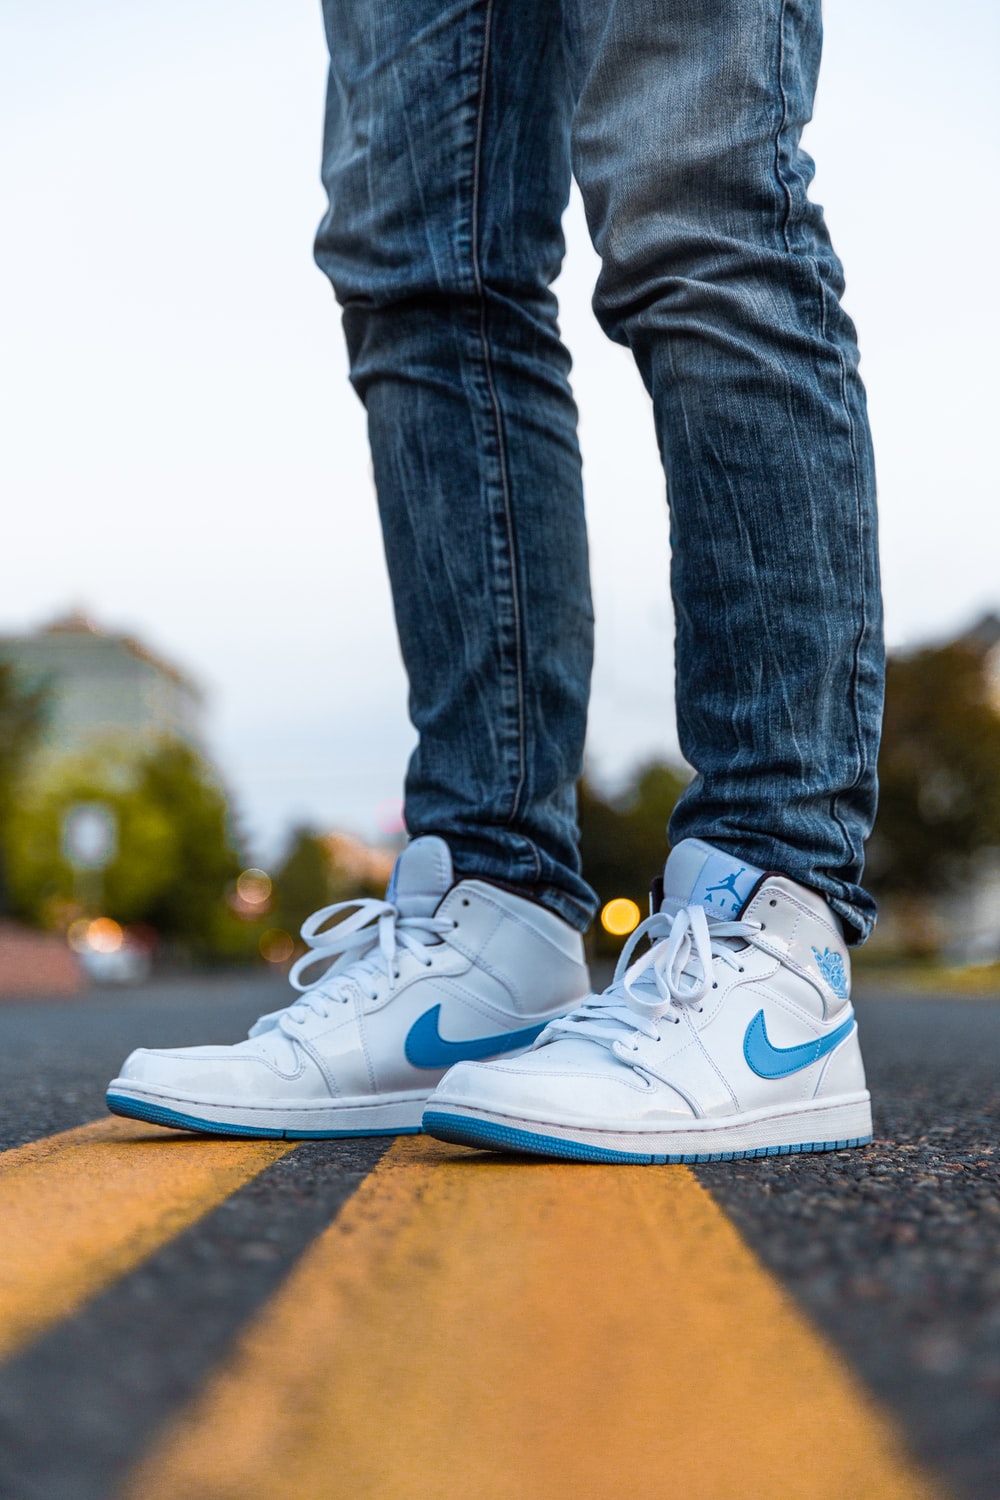 The best apps for buying sneakers | Engadget